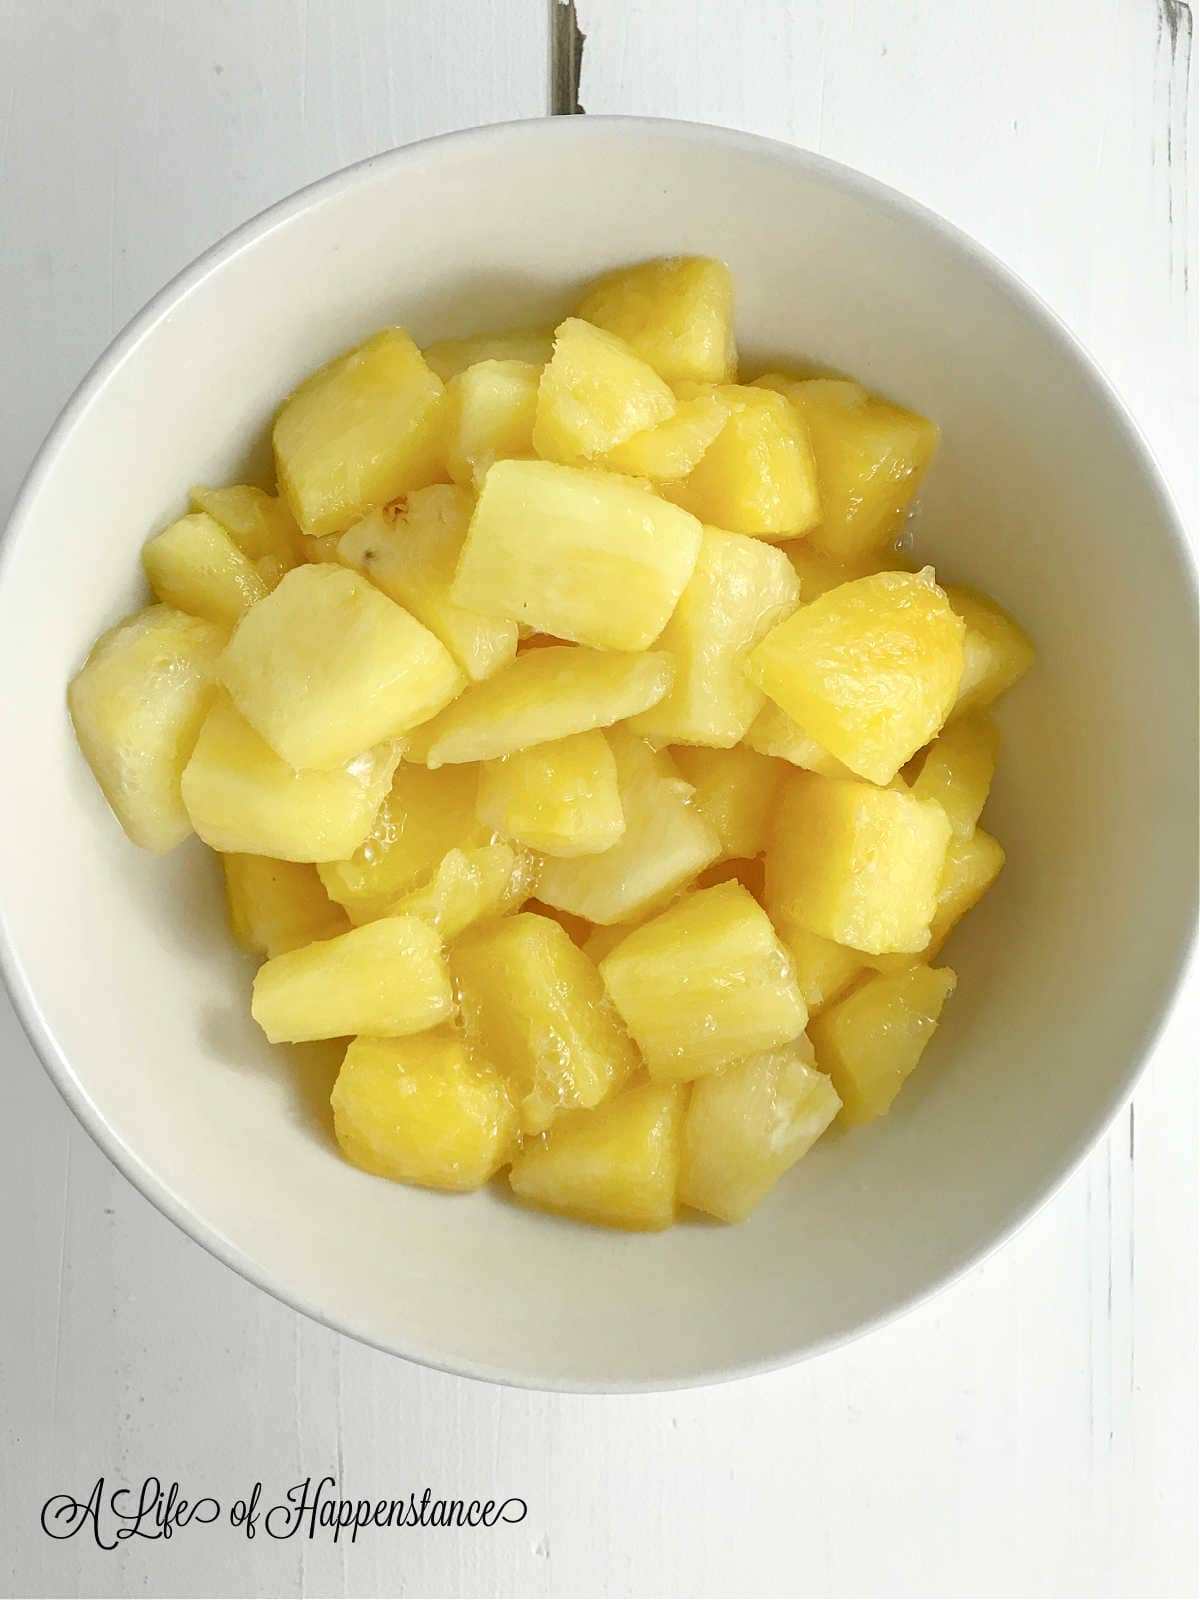 Chopped pineapple in a white bowl.